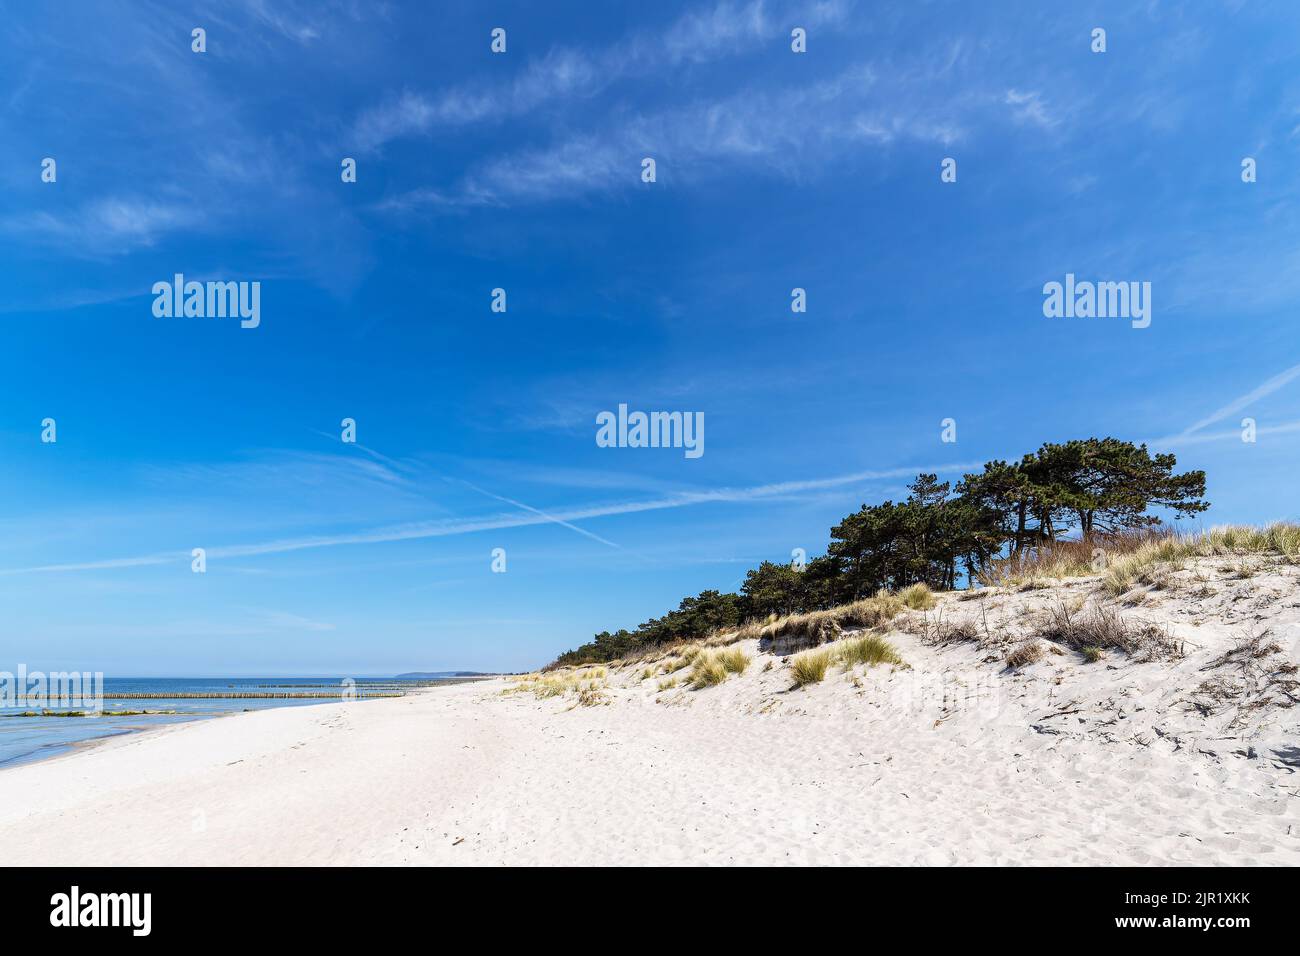 Beach and dunes in Neuendorf on the island Hiddensee, Germany. Stock Photo